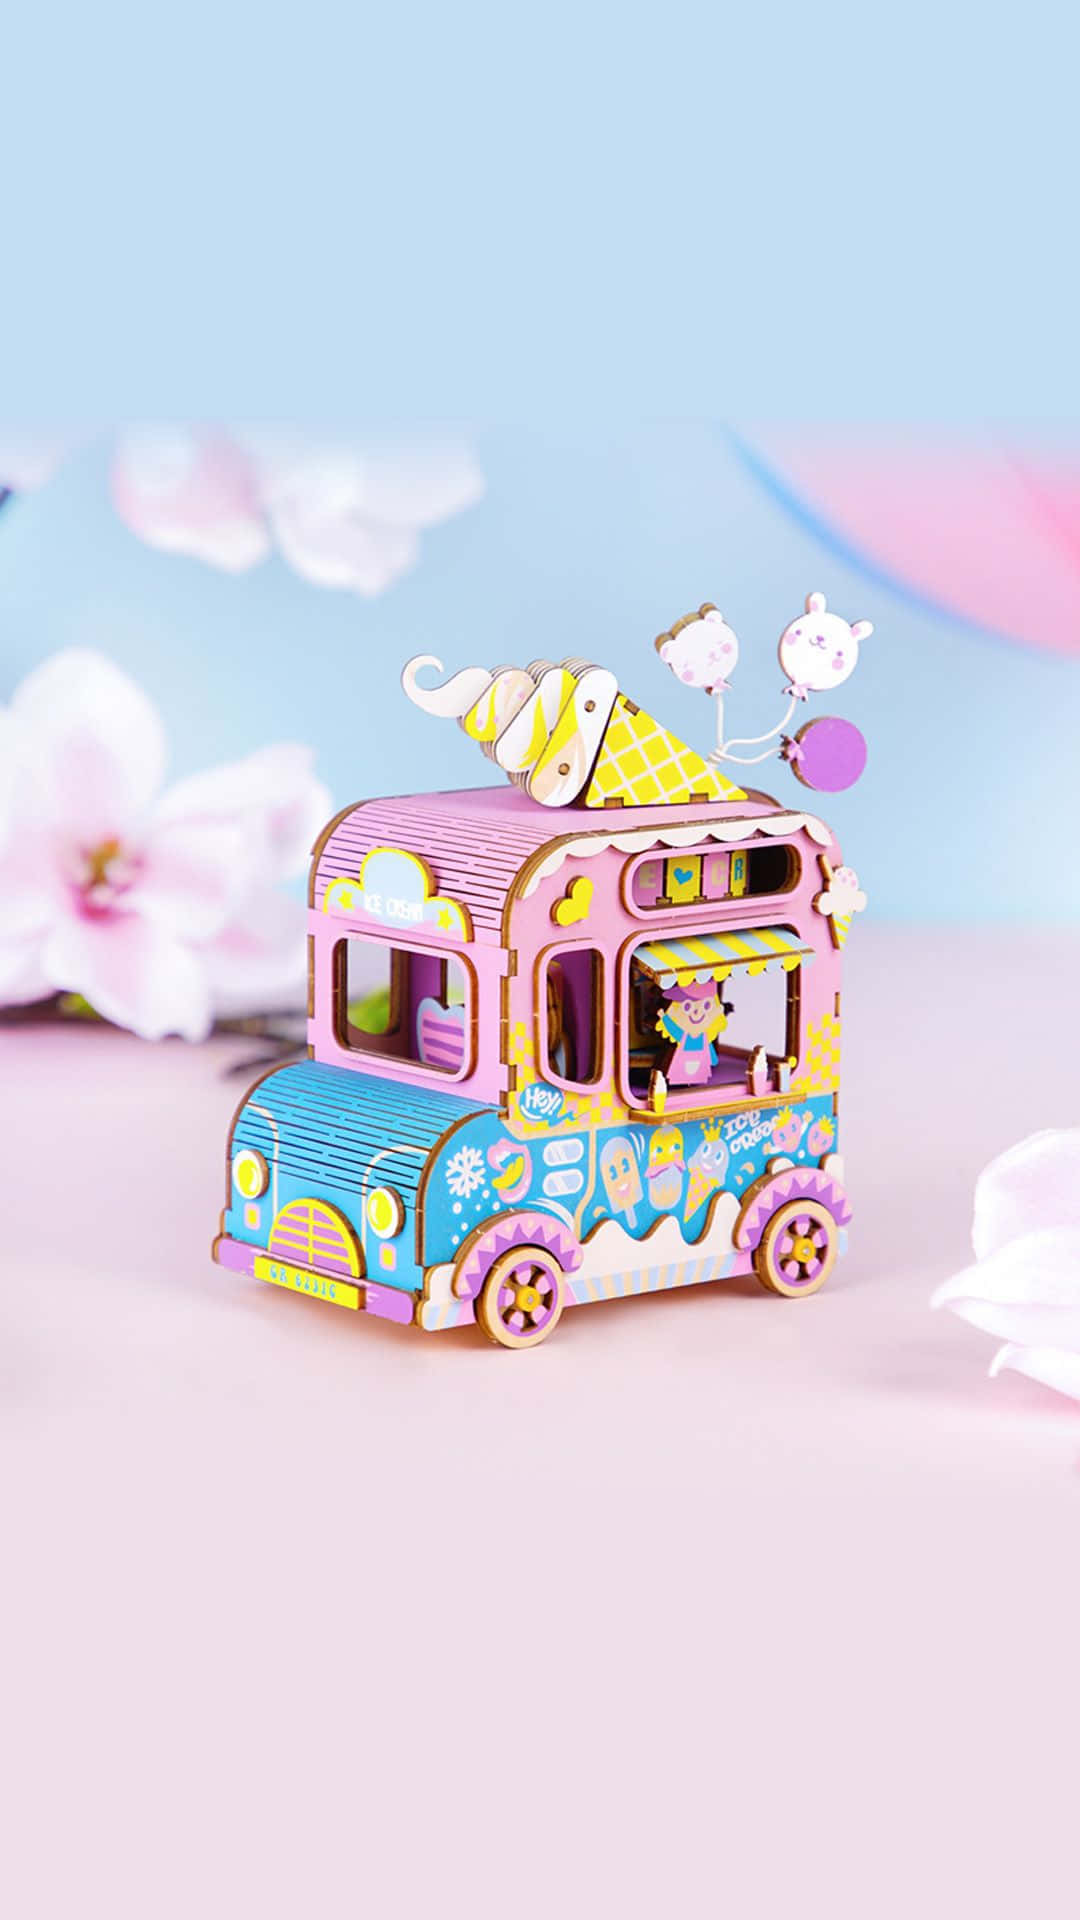 A Toy Ice Cream Truck With Flowers On It